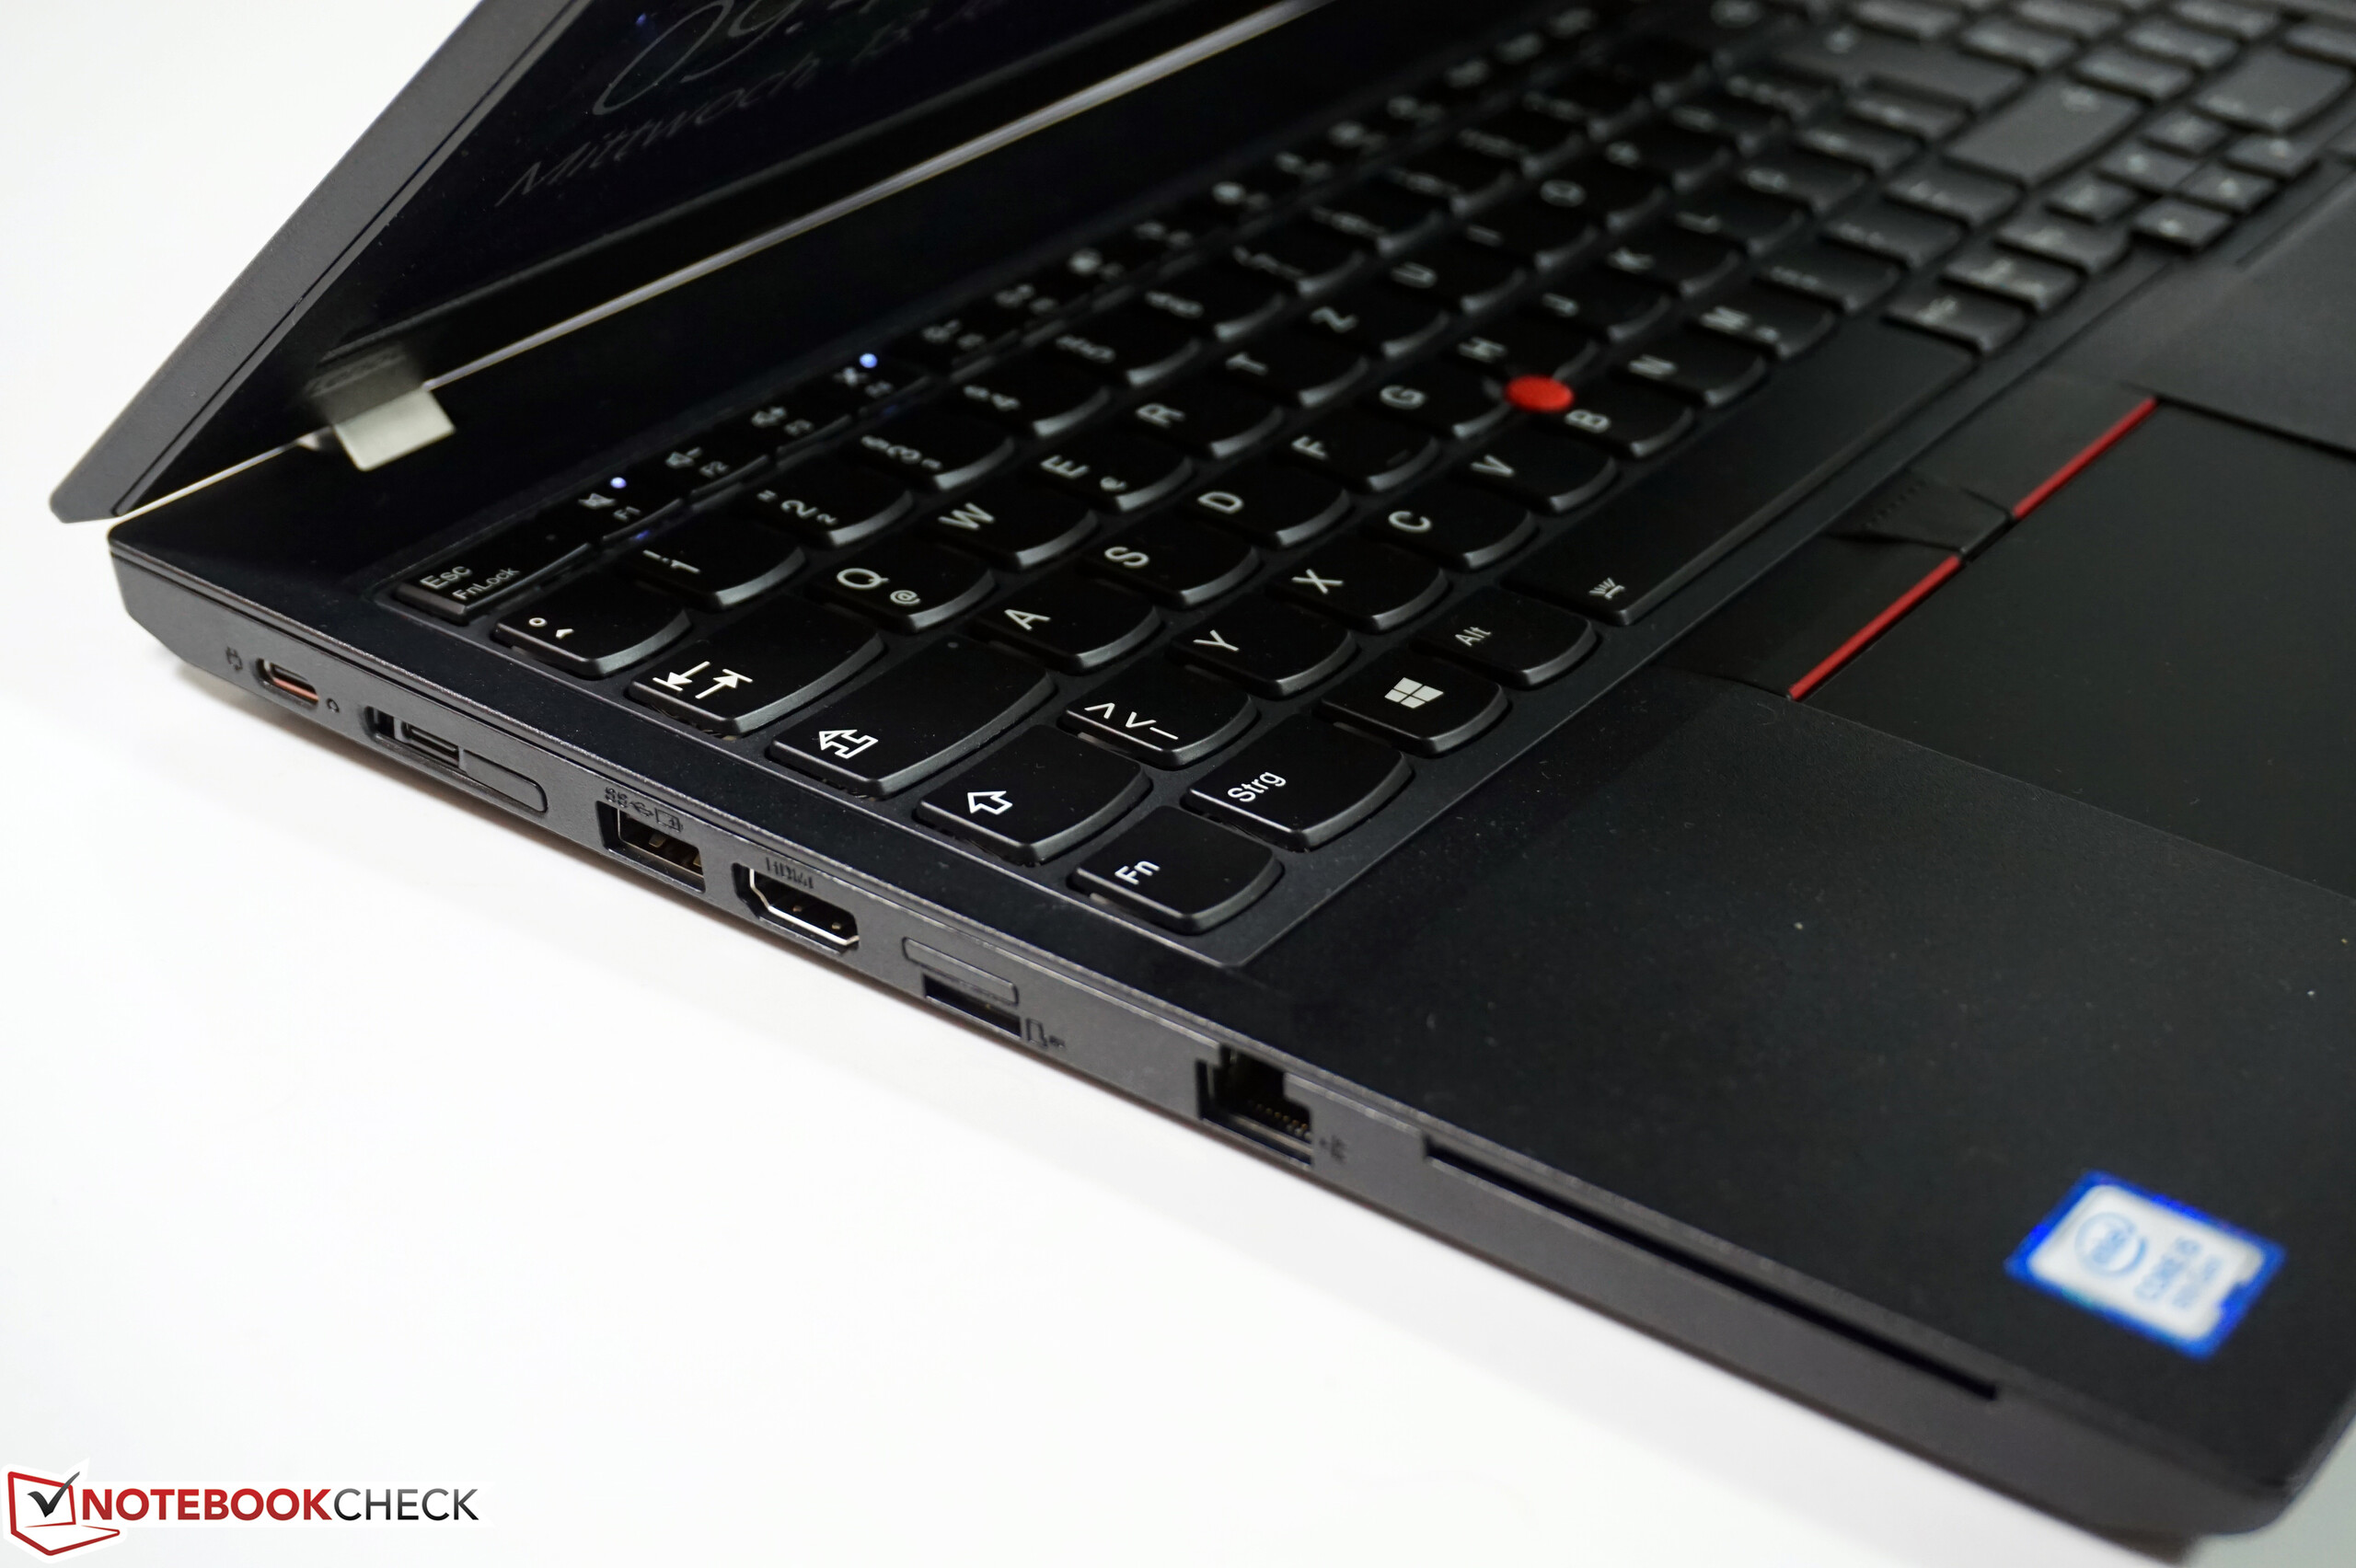 Lenovo ThinkPad L580 Laptop Review: Reliable office notebook with 